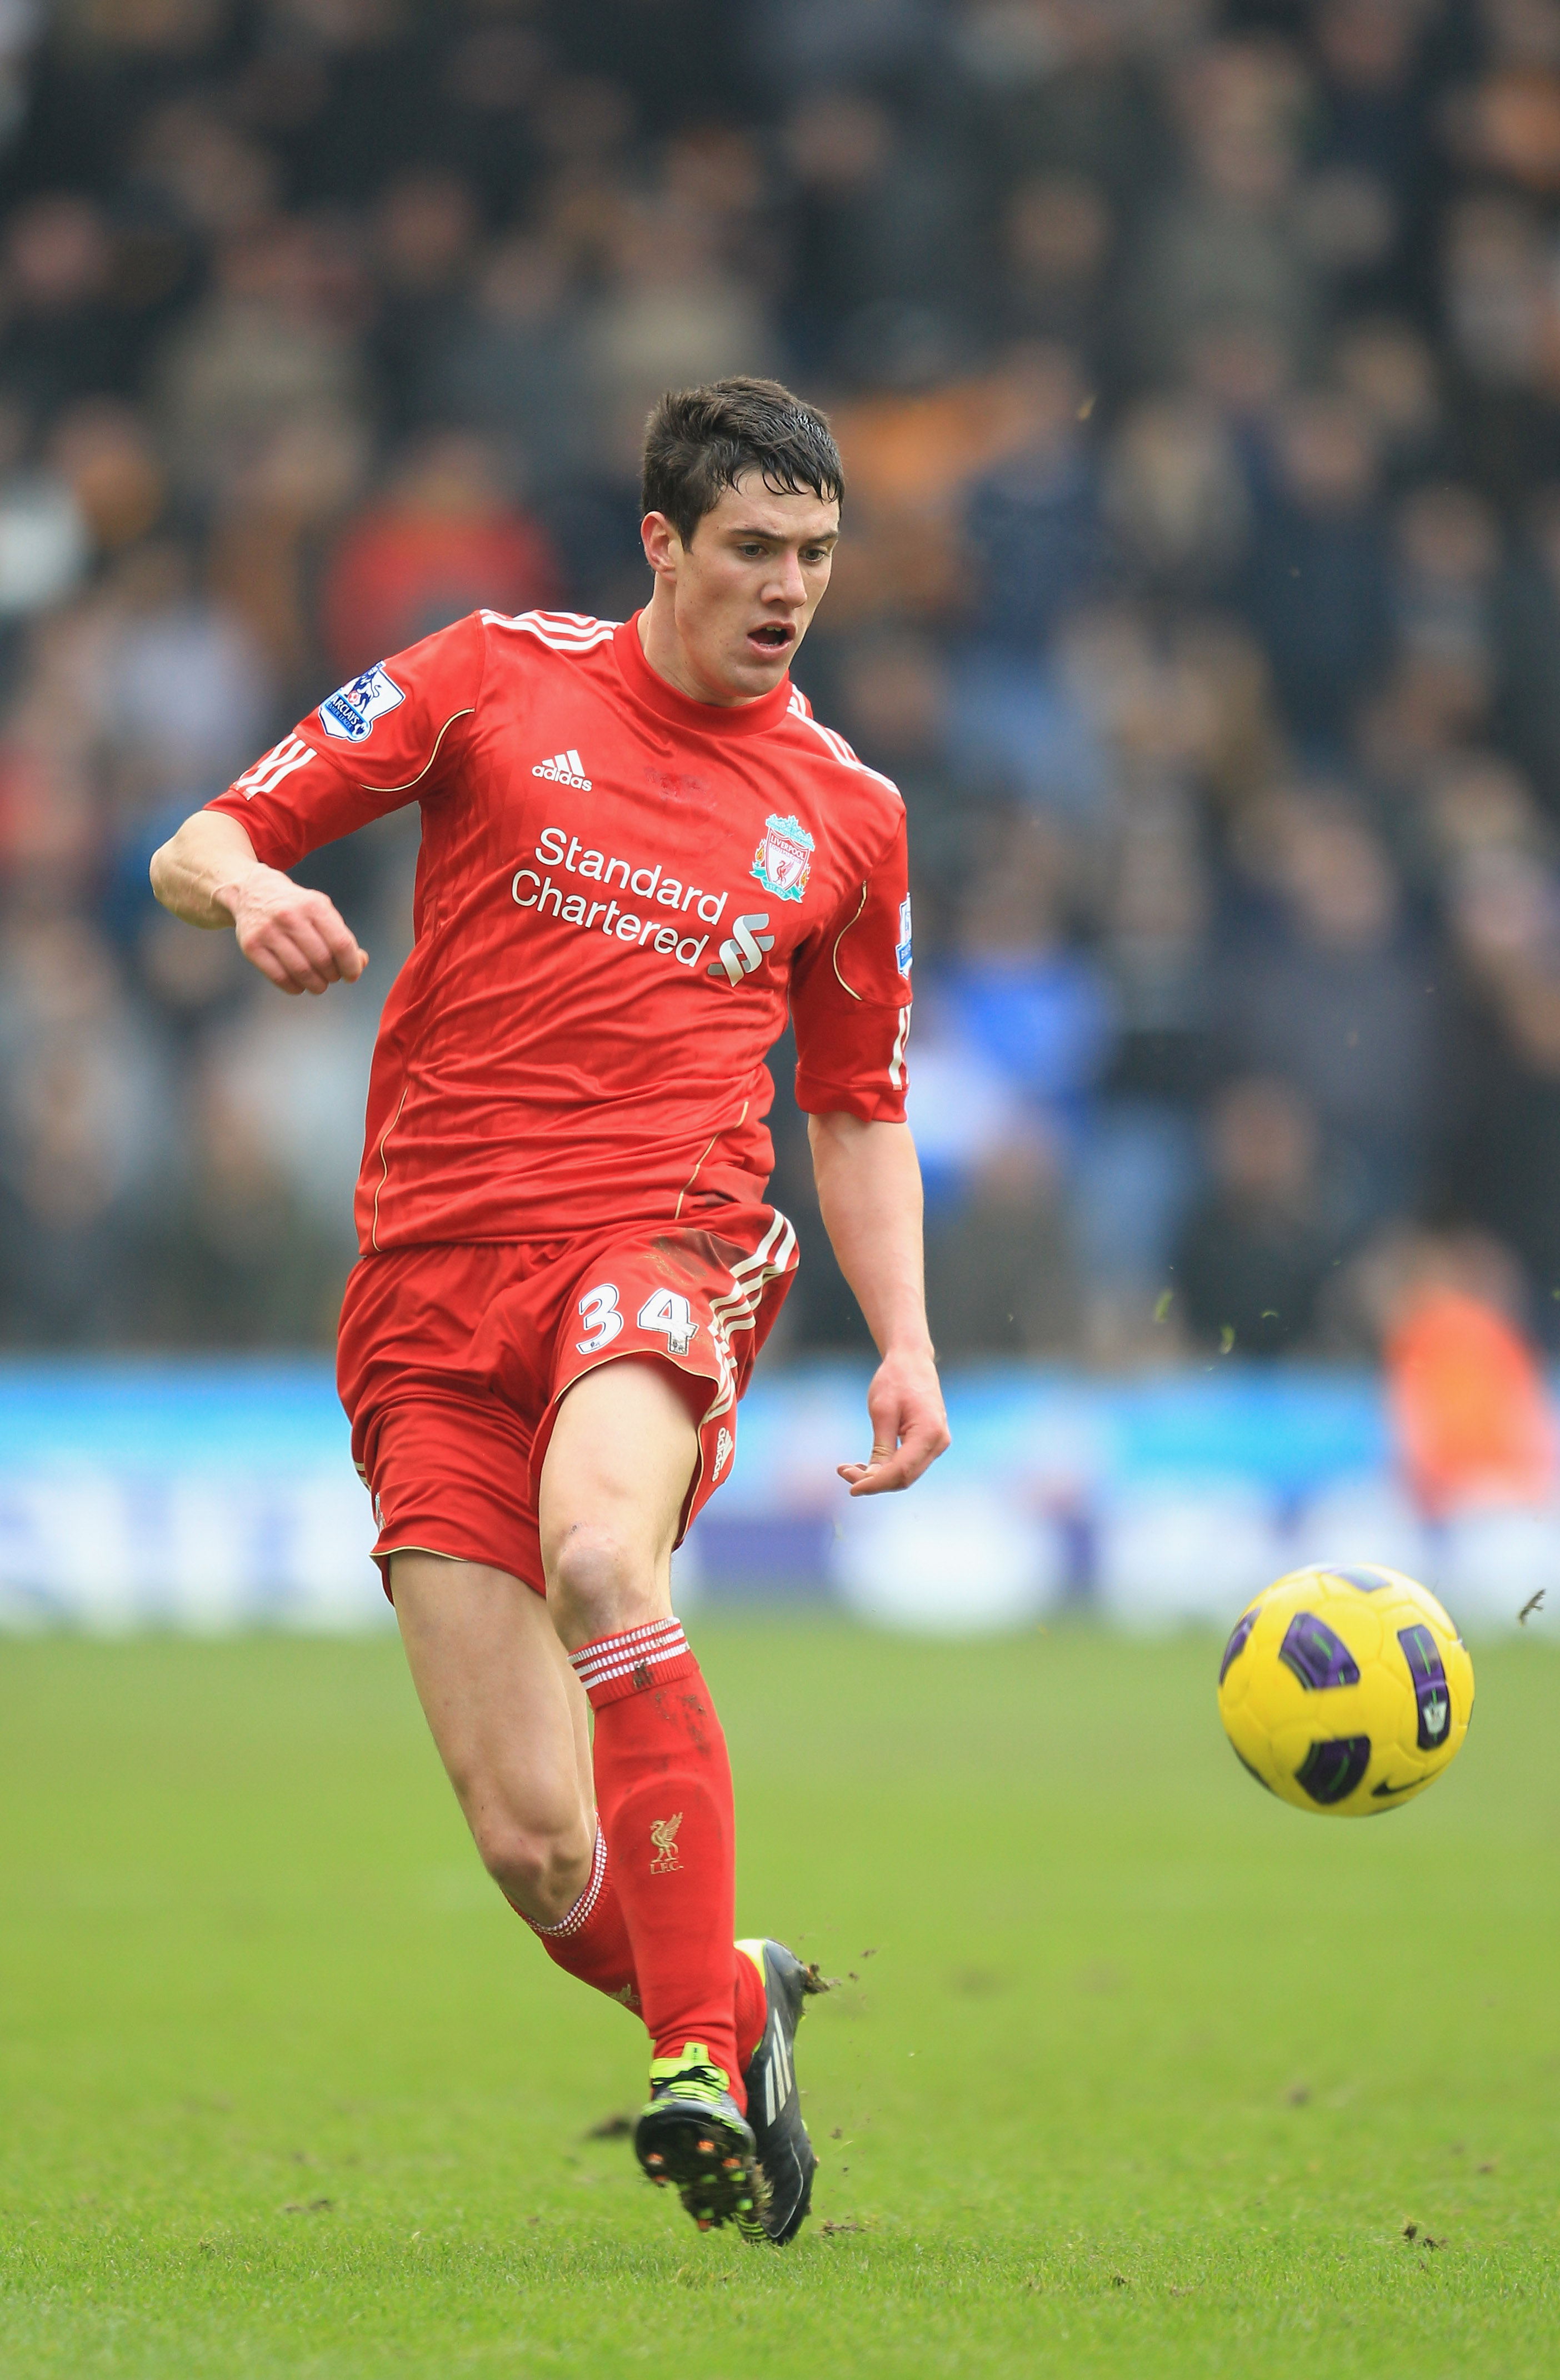 WOLVERHAMPTON, ENGLAND - JANUARY 22:    Martin Kelly of Liverpool in action during the Barclays Premier League match between Wolverhampton Wanderers and Liverpool at Molineux on January 22, 2011 in Wolverhampton, England.  (Photo by Mark Thompson/Getty Im